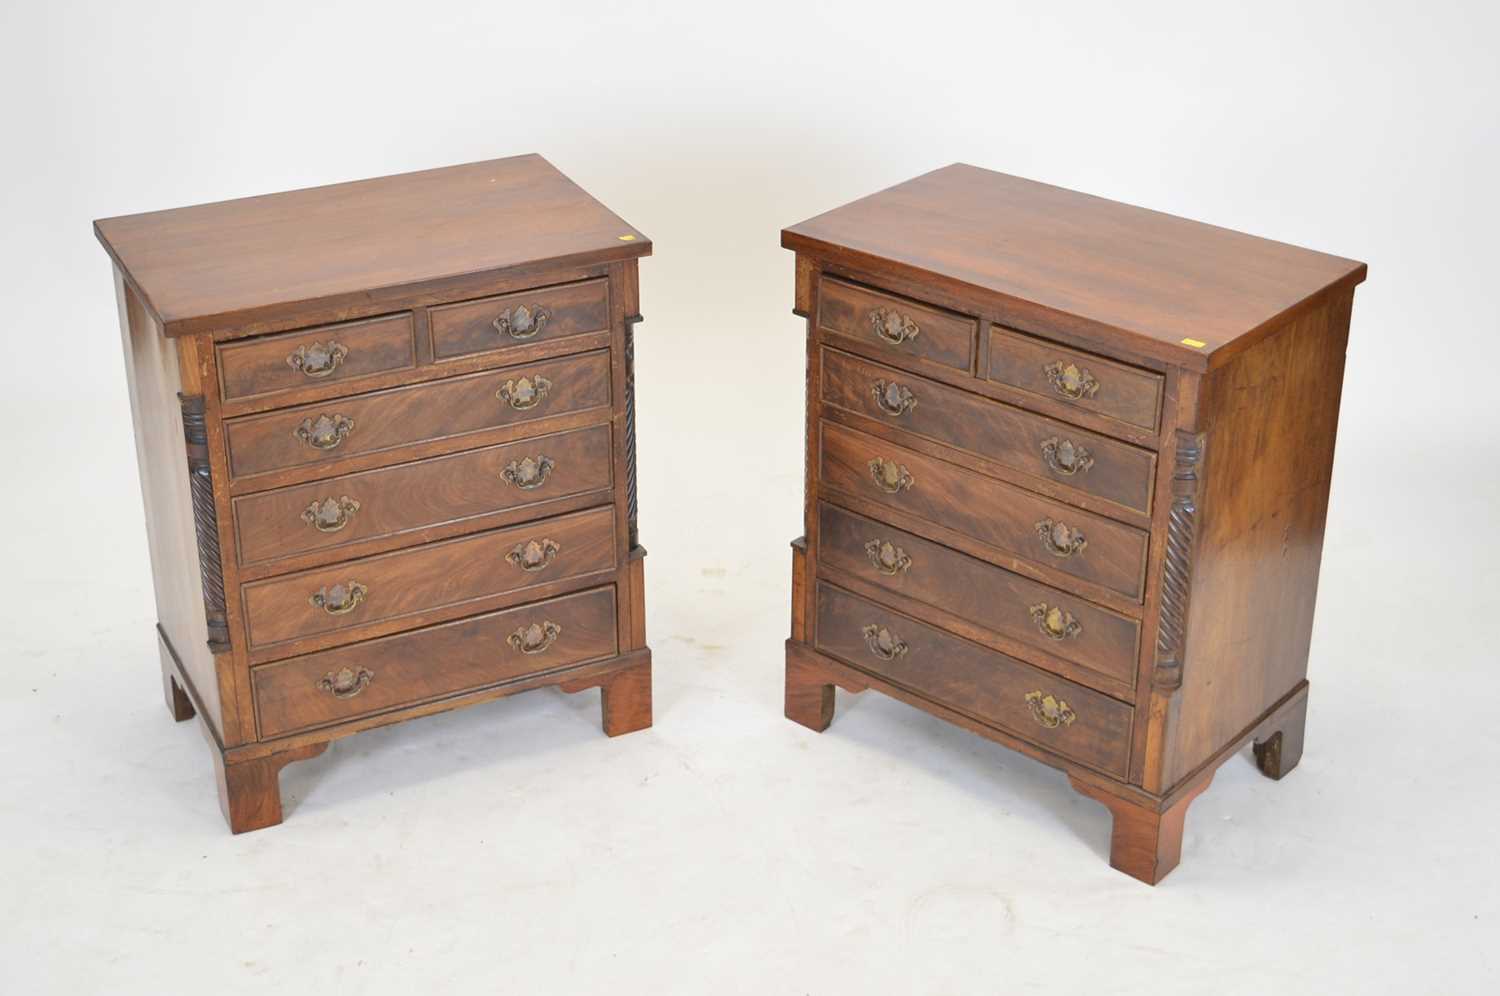 Lot 925 - Pair of George III style chests of drawers